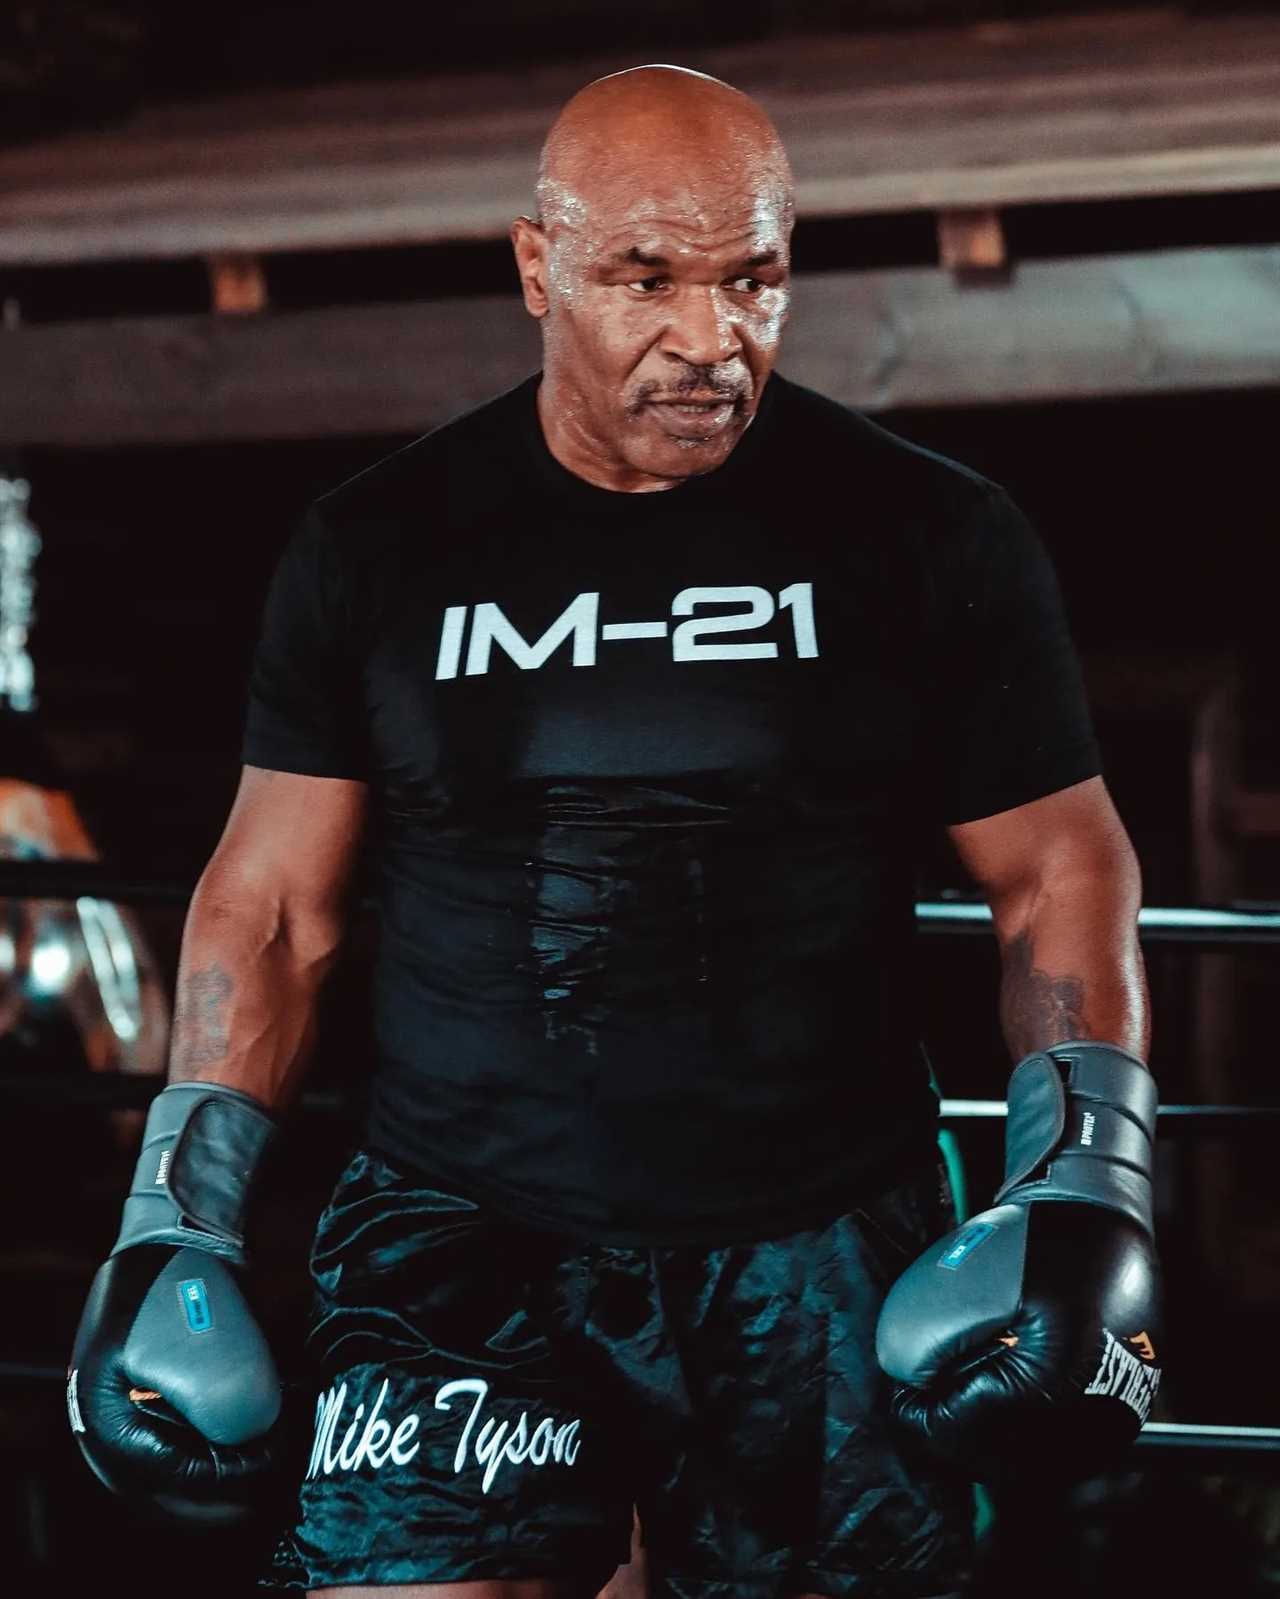 Mike Tyson (55) confirms talks to Jake Paul (25), about shock boxing fights with YouTuber